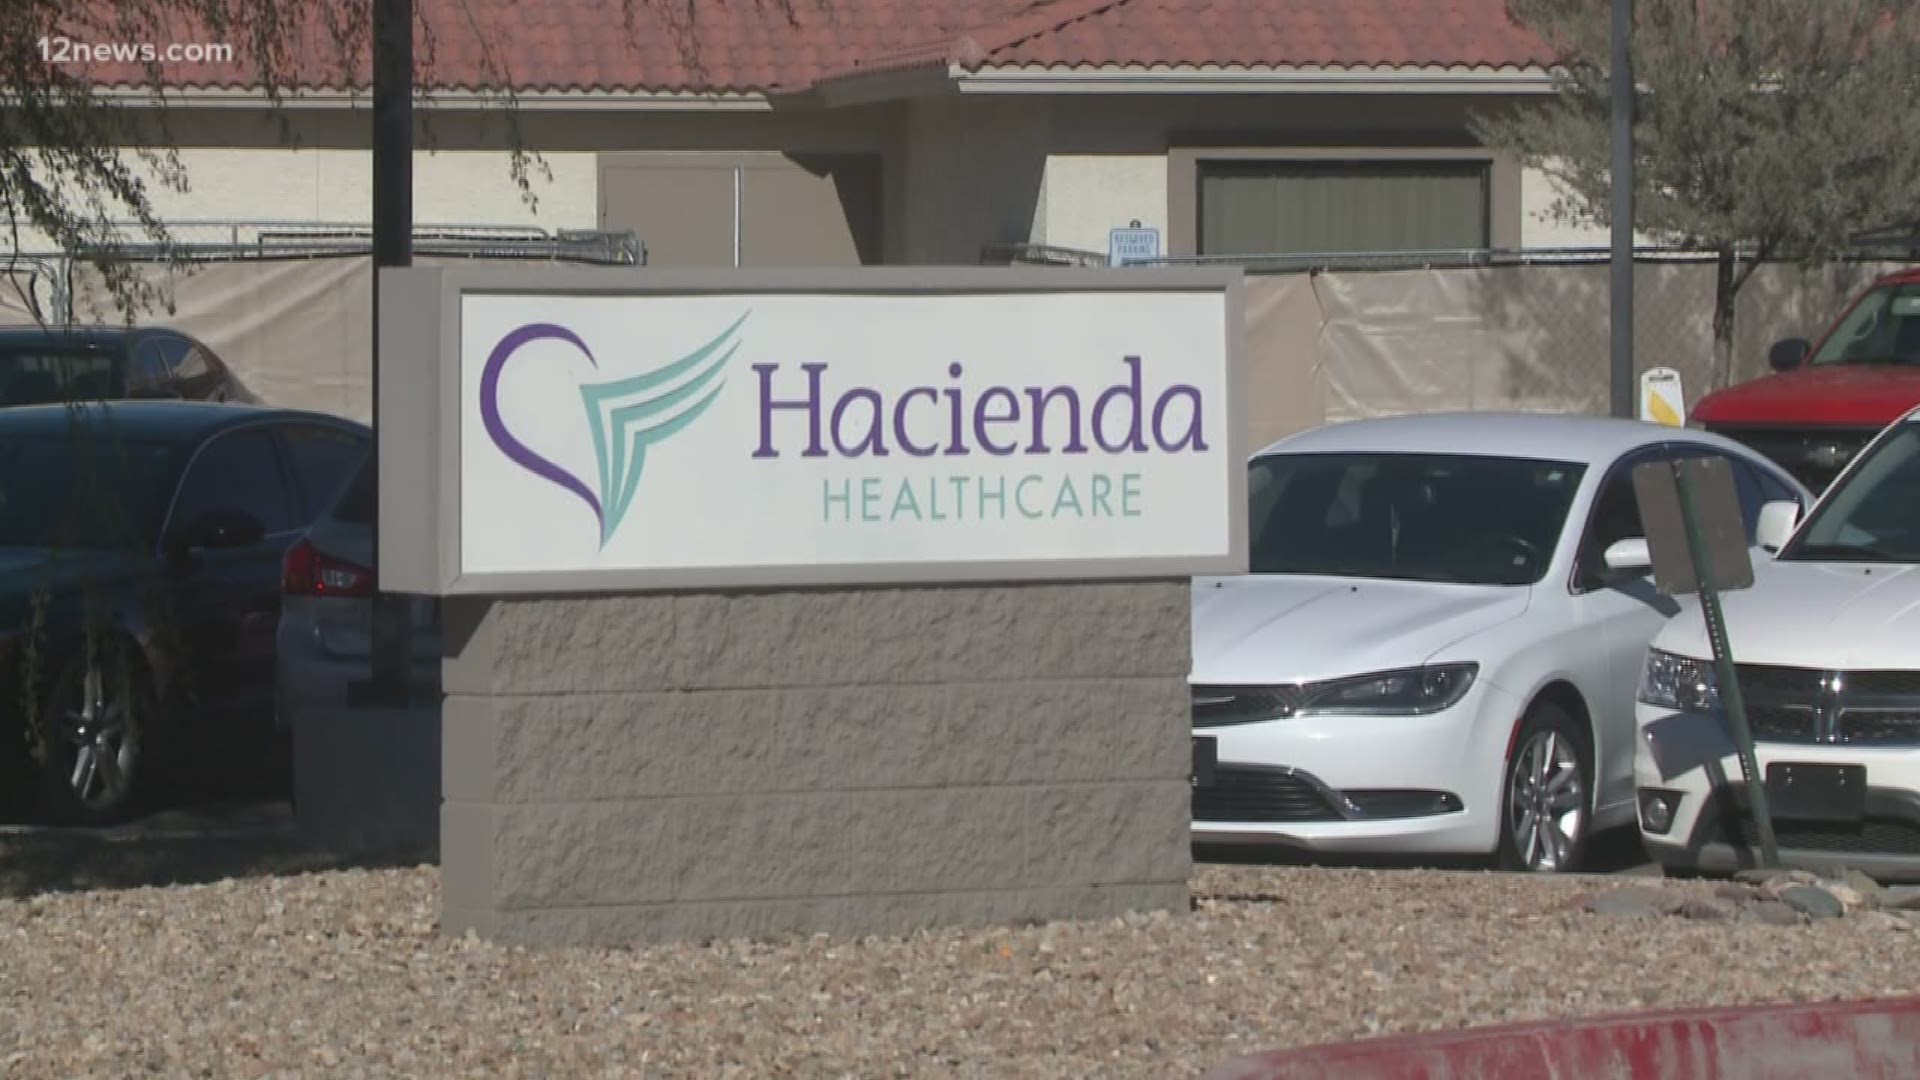 Hacienda Healthcare has well-documented issues with Arizona's Department of Economic Security. Within weeks of taking over DES four years ago, Tim Jeffries was alerted to possible fraud taking place there.